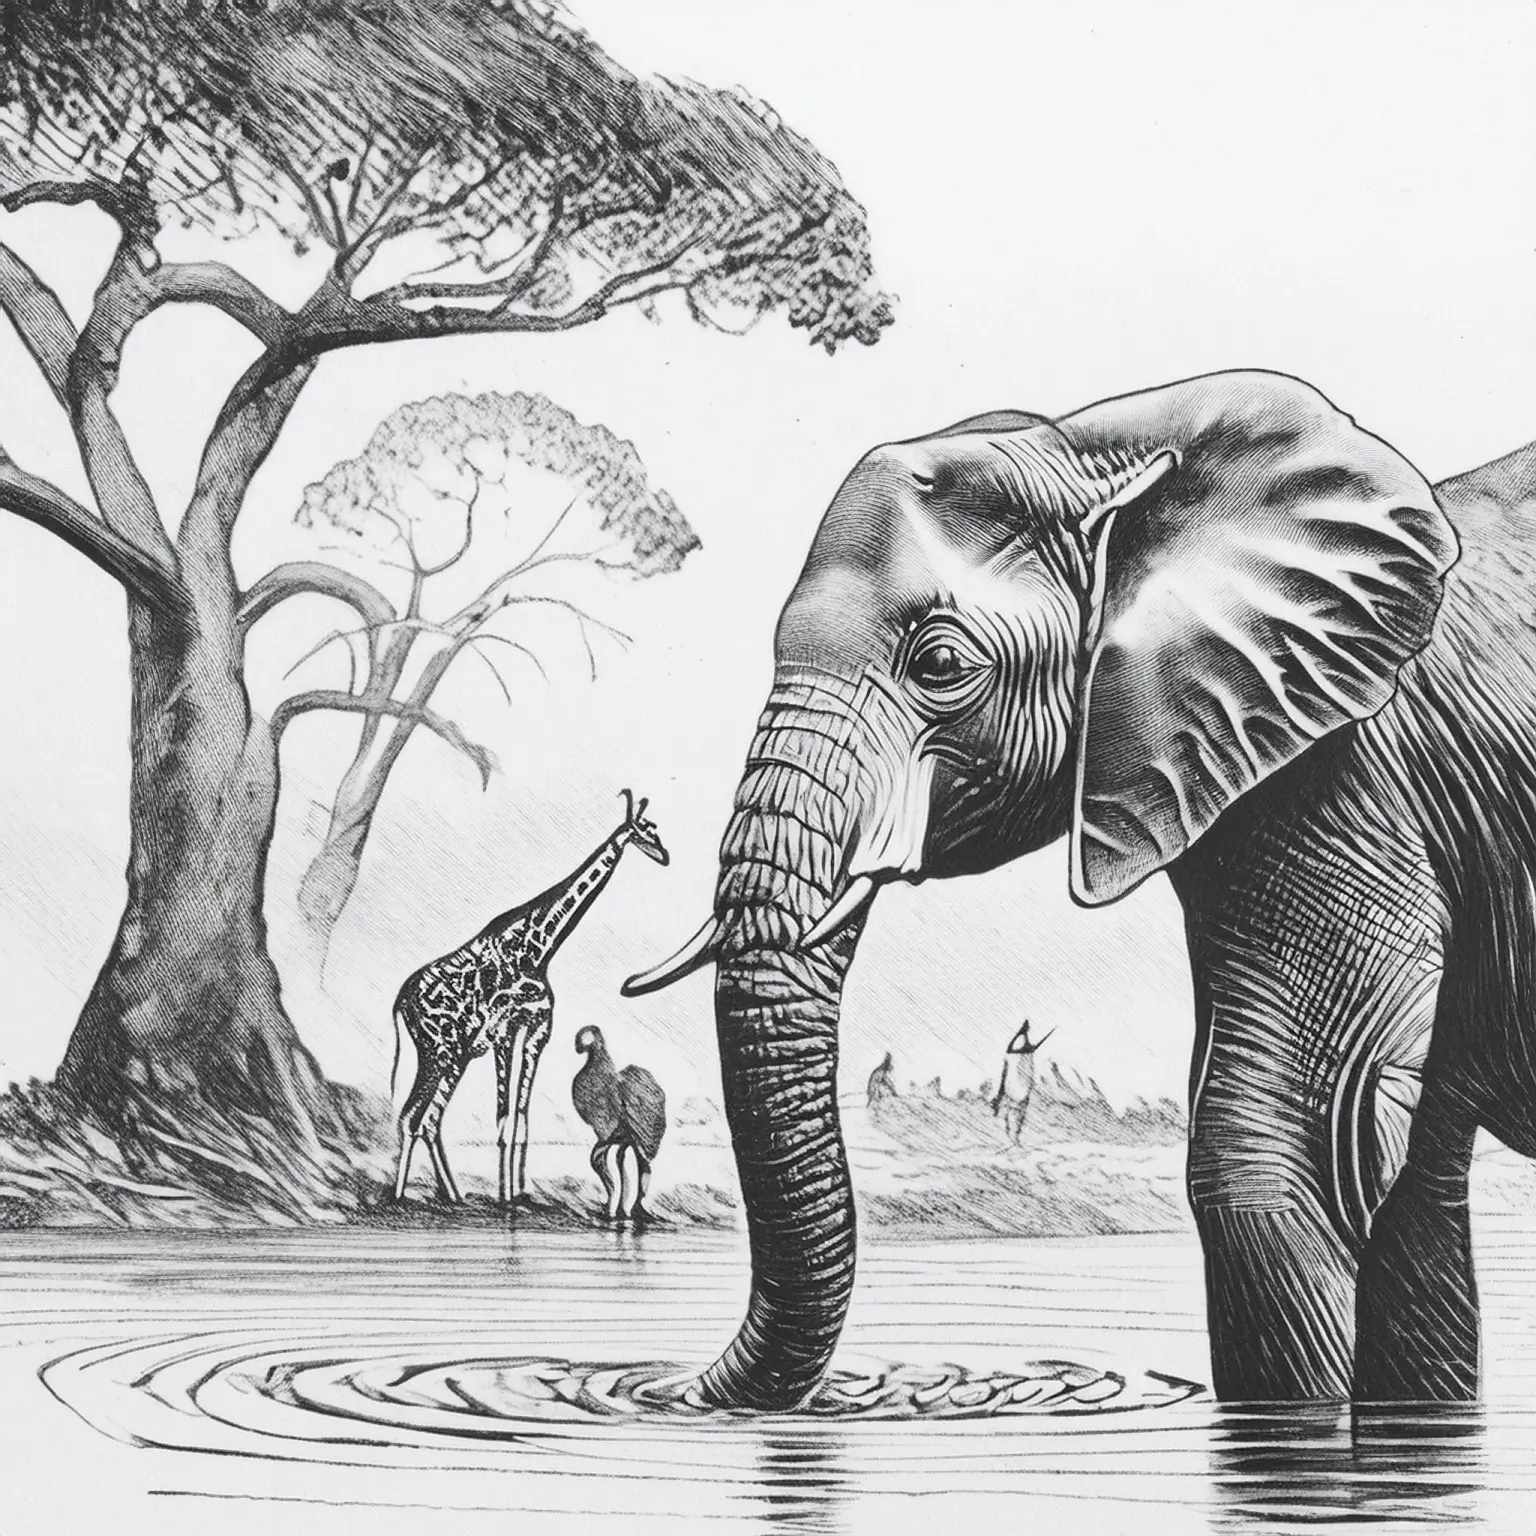 Style-Reference-image-output-to-mirror-black-and-white-drawing_amazonian-forest-elephant-drinking-water-with-giraffes.webp